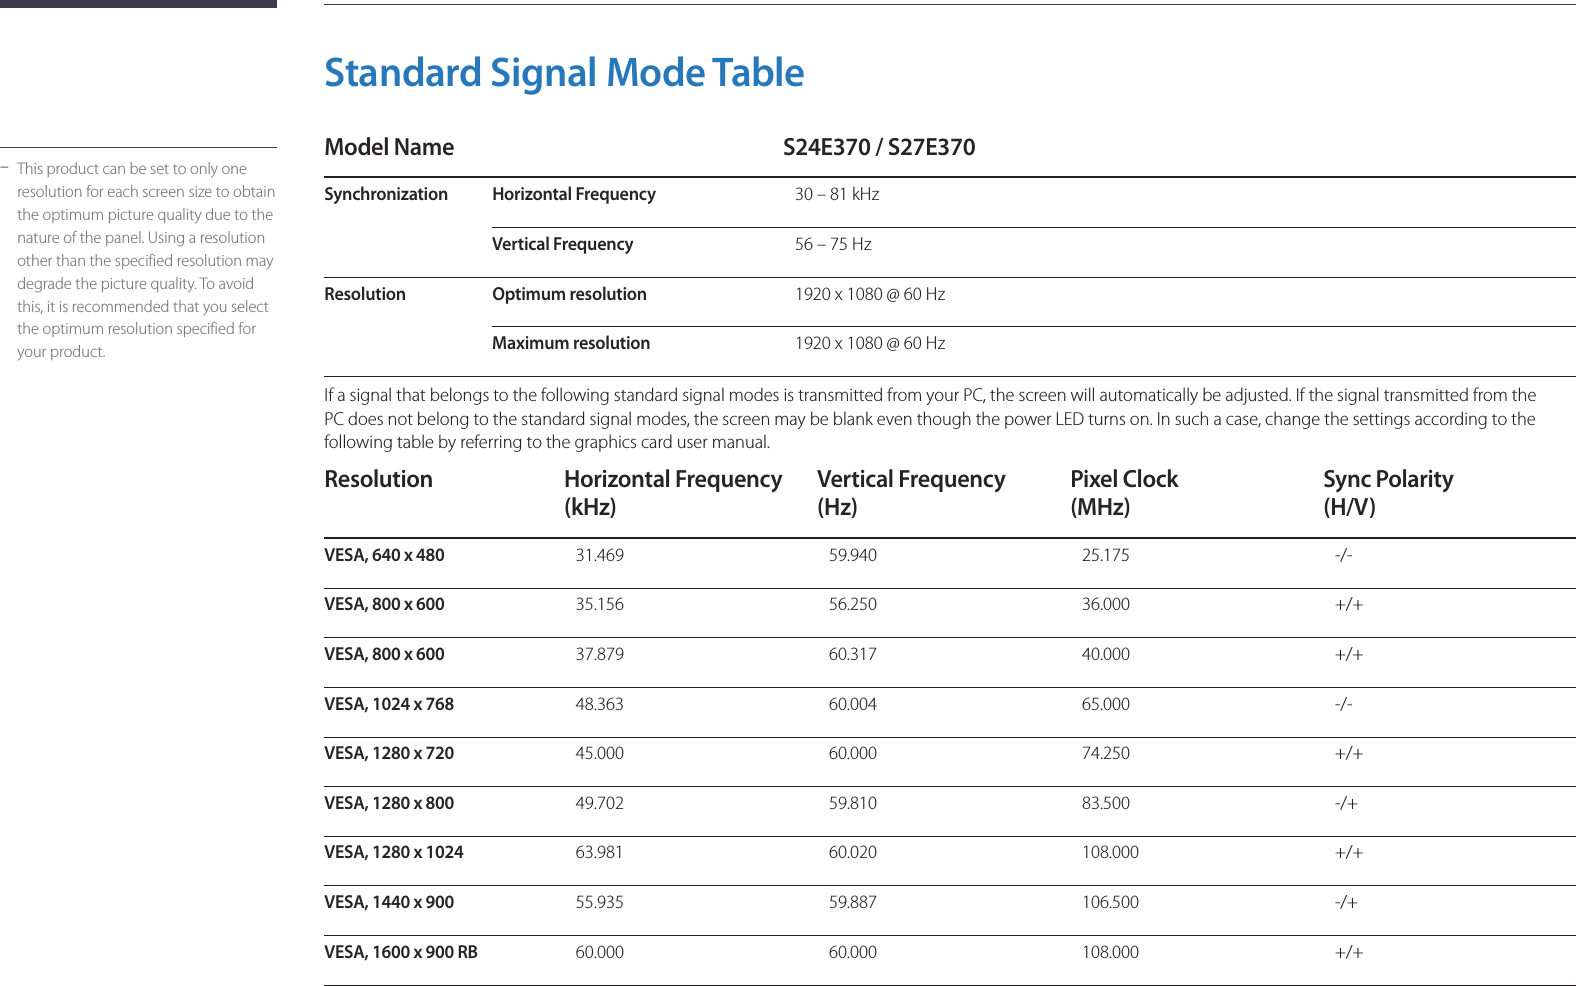 74Standard Signal Mode Table -This product can be set to only one resolution for each screen size to obtain the optimum picture quality due to the nature of the panel. Using a resolution other than the specified resolution may degrade the picture quality. To avoid this, it is recommended that you select the optimum resolution specified for your product.Model Name S24E370 / S27E370Synchronization Horizontal Frequency30 – 81 kHzVertical Frequency56 – 75 HzResolution Optimum resolution1920 x 1080 @ 60 HzMaximum resolution1920 x 1080 @ 60 HzIf a signal that belongs to the following standard signal modes is transmitted from your PC, the screen will automatically be adjusted. If the signal transmitted from the PC does not belong to the standard signal modes, the screen may be blank even though the power LED turns on. In such a case, change the settings according to the following table by referring to the graphics card user manual.Resolution Horizontal Frequency (kHz)Vertical Frequency (Hz)Pixel Clock (MHz)Sync Polarity (H/V)VESA, 640 x 48031.469 59.940  25.175  -/-VESA, 800 x 60035.156  56.250  36.000  +/+VESA, 800 x 60037.879  60.317  40.000  +/+VESA, 1024 x 76848.363  60.004  65.000  -/-VESA, 1280 x 72045.000  60.000  74.250  +/+VESA, 1280 x 80049.702  59.810  83.500  -/+VESA, 1280 x 102463.981  60.020  108.000  +/+VESA, 1440 x 90055.935  59.887  106.500  -/+VESA, 1600 x 900 RB60.000  60.000  108.000  +/+